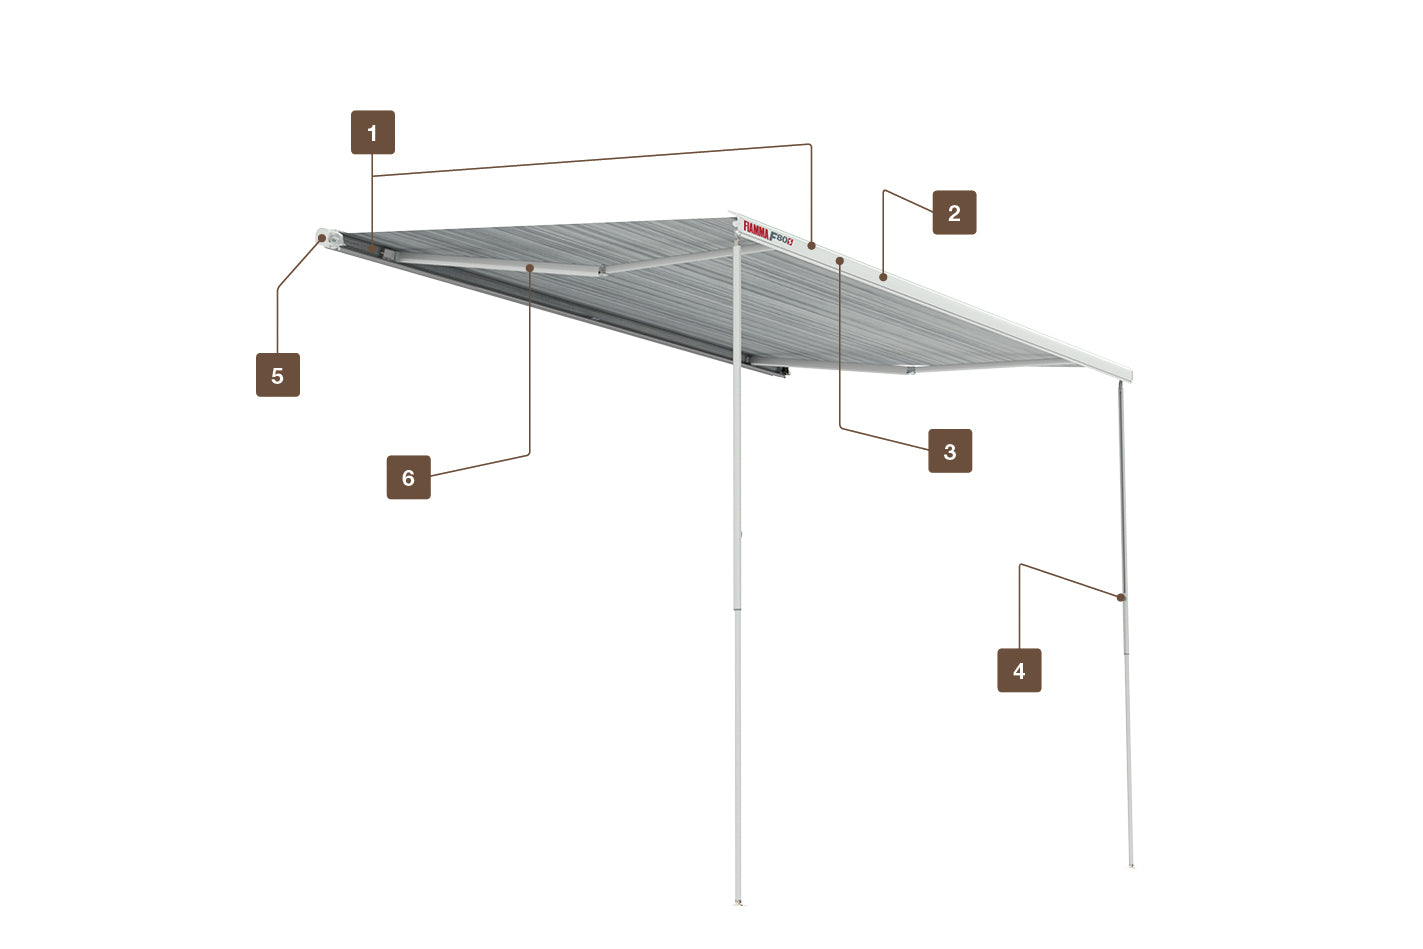 Fiamma F80s Awning Features